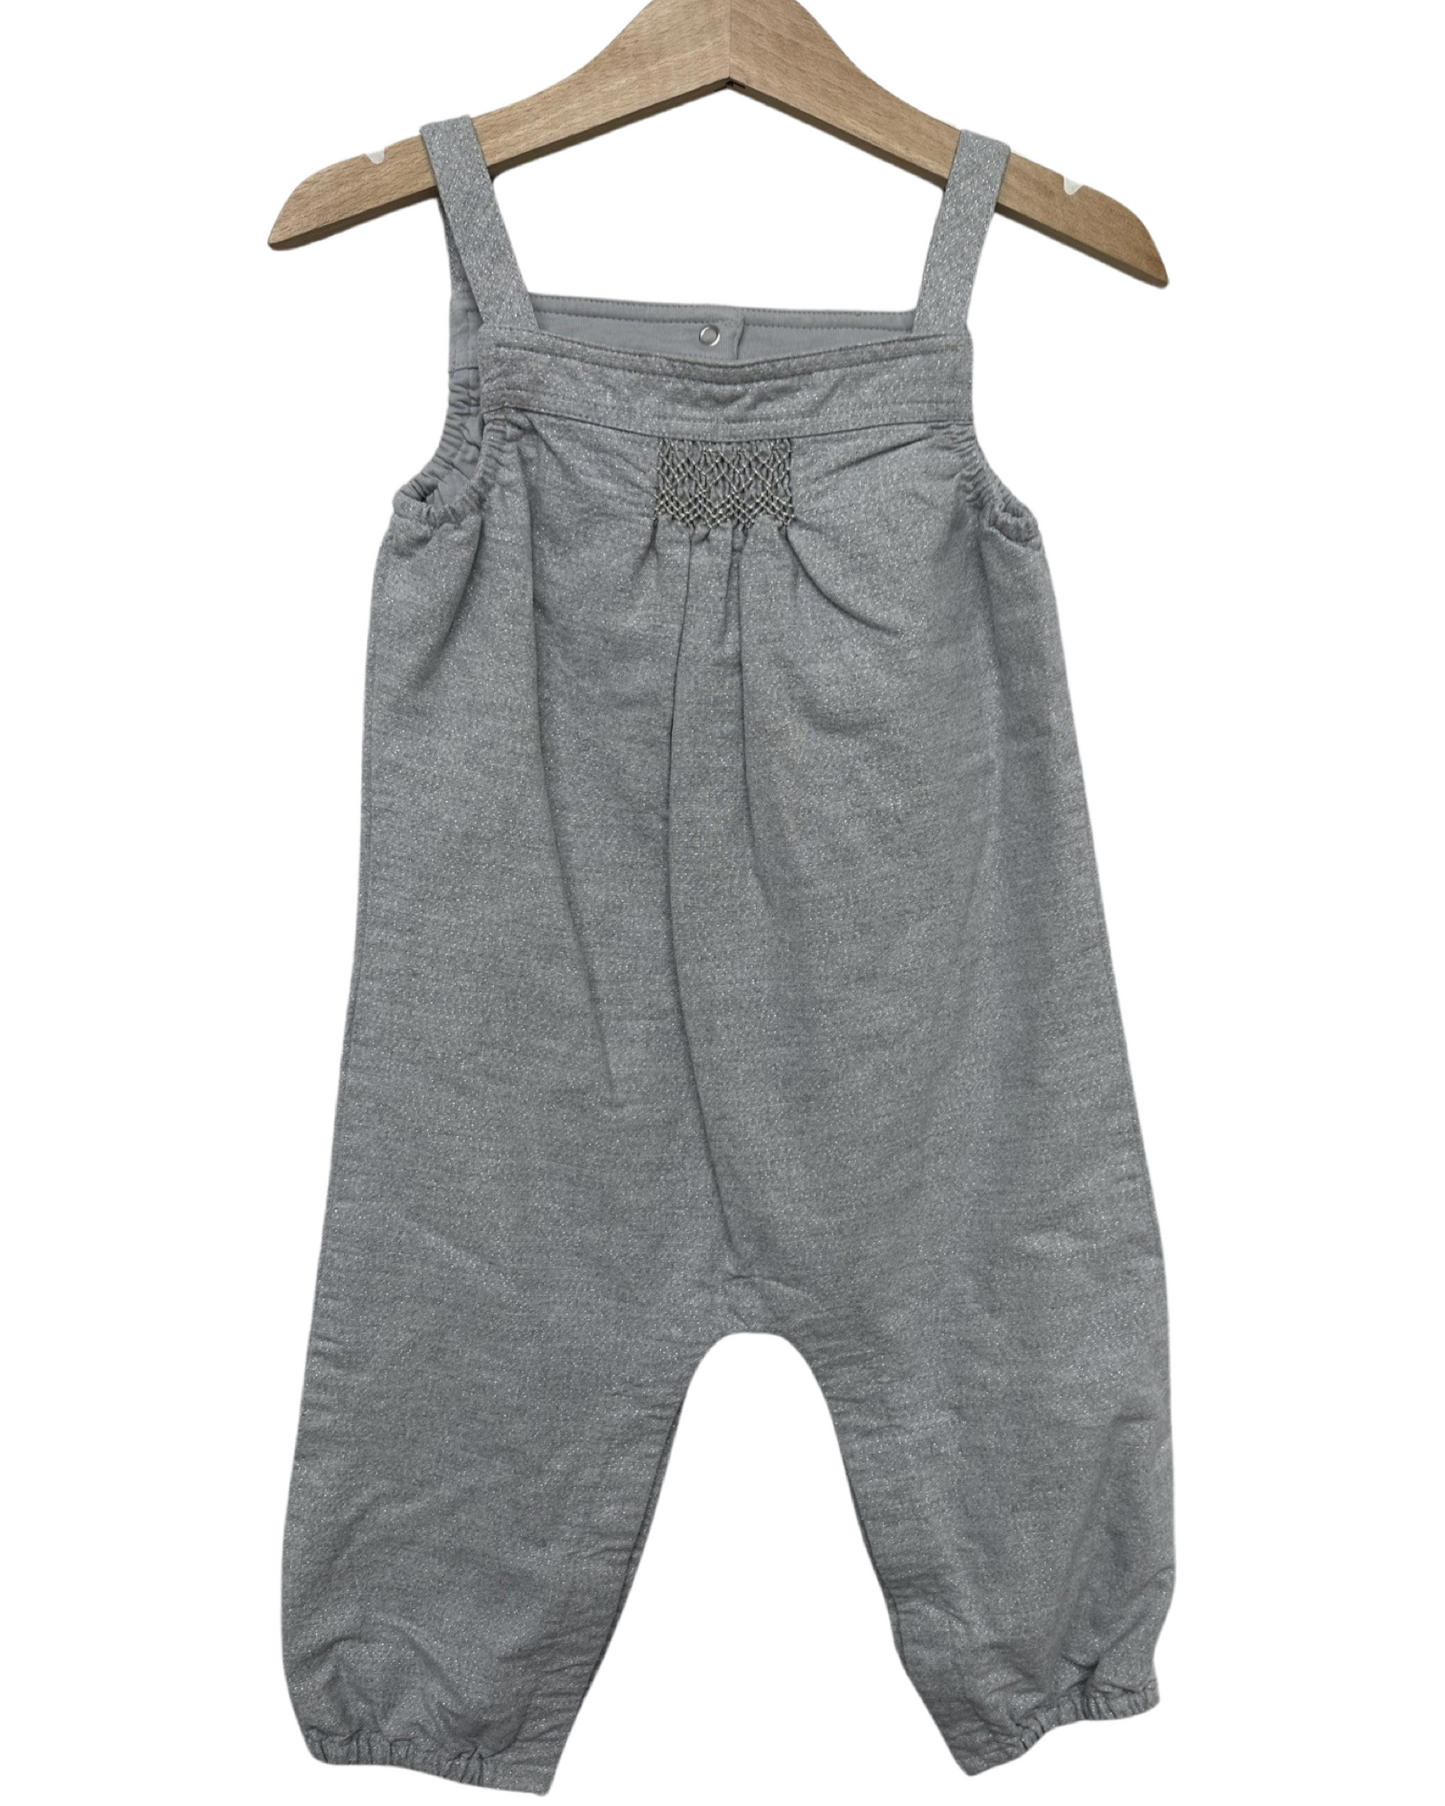 The Little White Company silver romper (size 18-24mths)